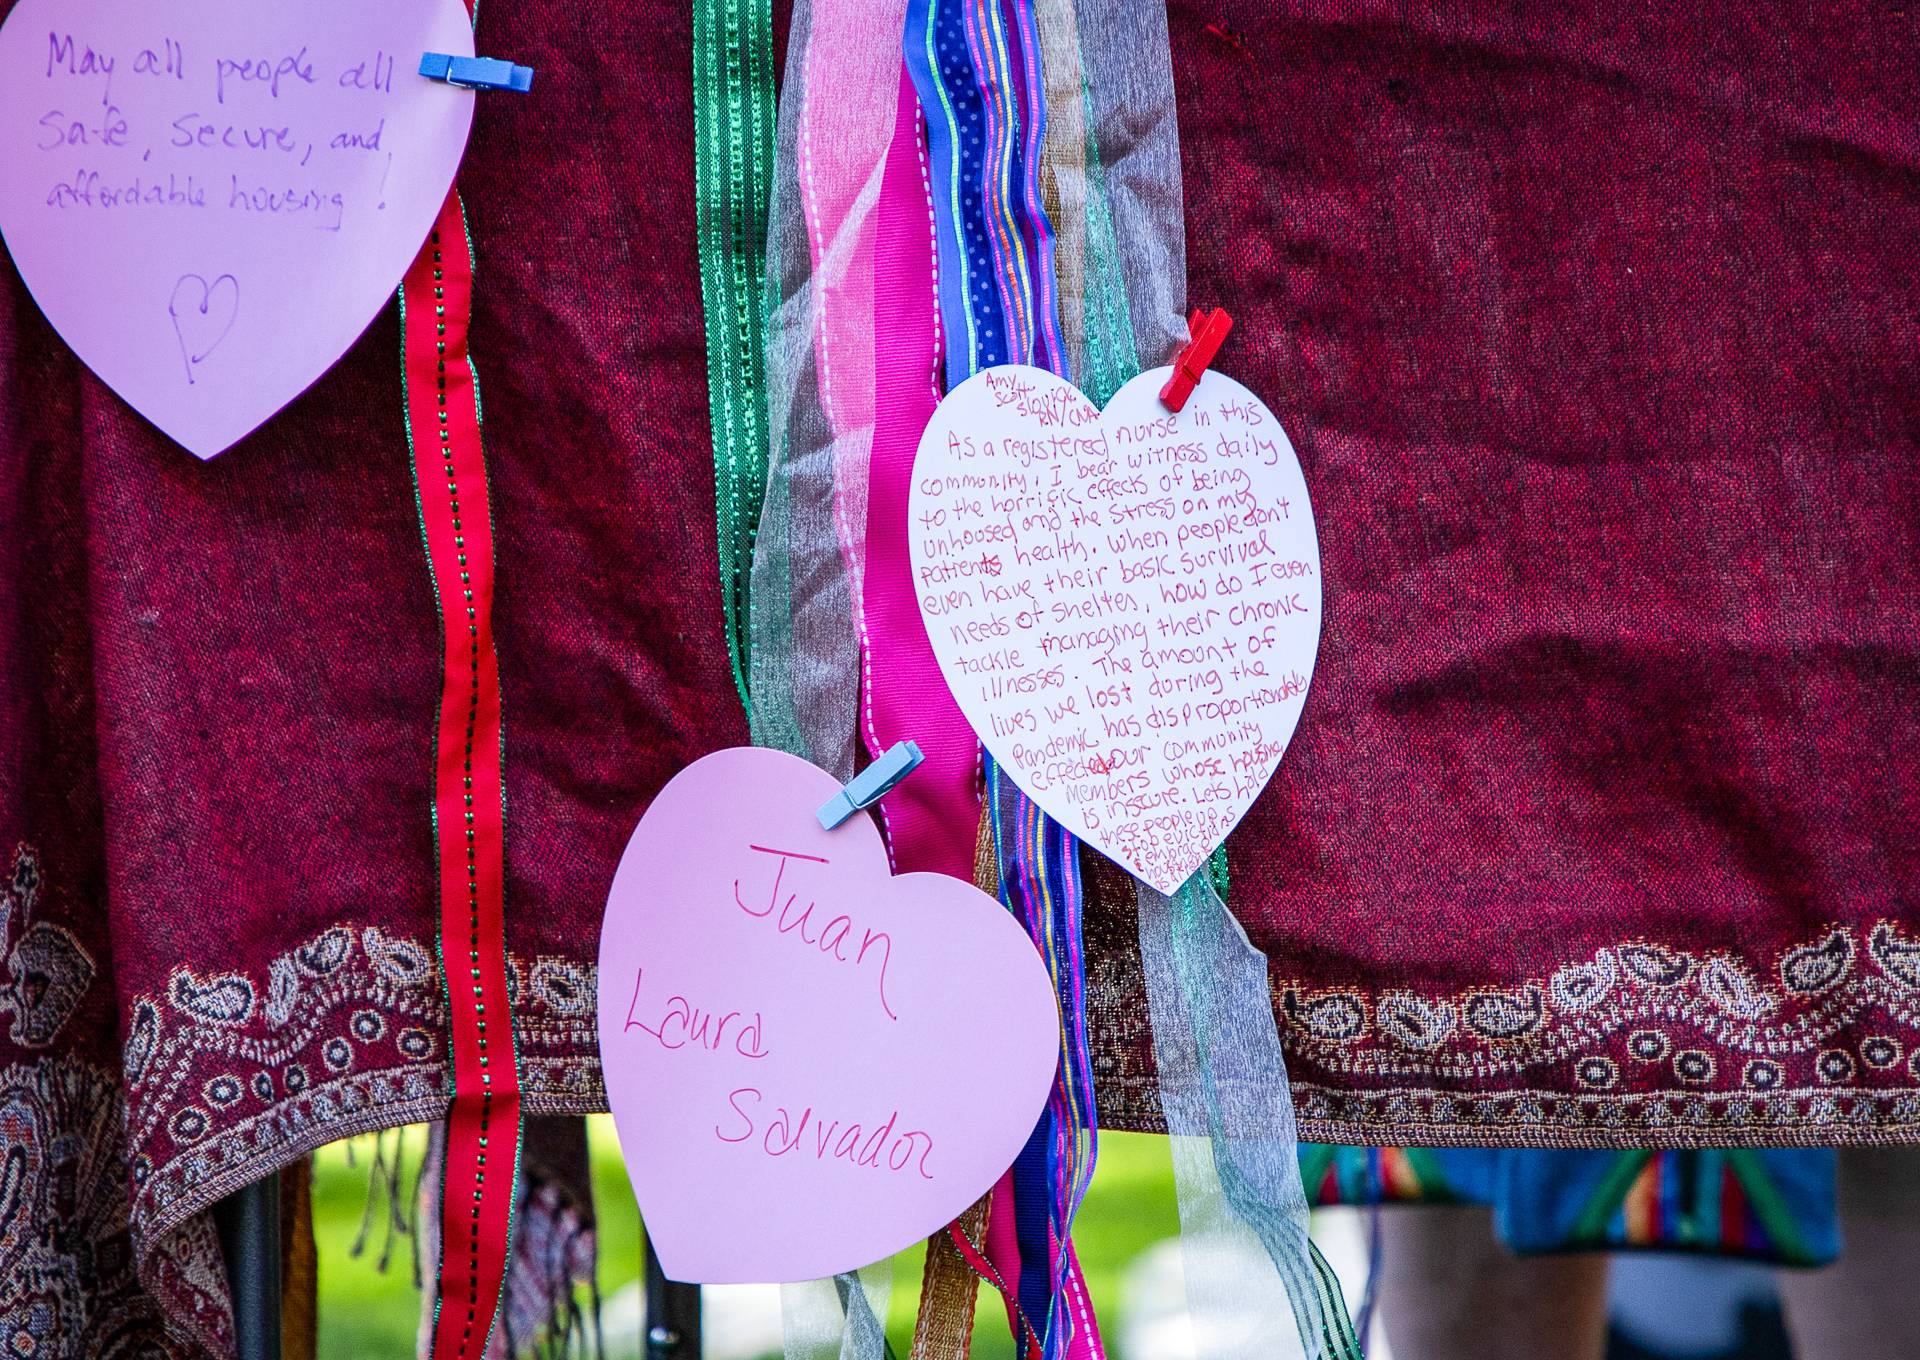 A close-up of three paper hearts -- white, pastel pink, and pastel purple -- with handwritten notes in red and purple pen, clipped with tiny blue and red wooden clothespins to multicolored ribbons: red, green, sheer, dark pink. The backdrop is a shimmery, crimson tablecloth with a paisley border, and blurry below it, on the other side of what must be a table, is a green lawn and what looks like a pair of ankles.